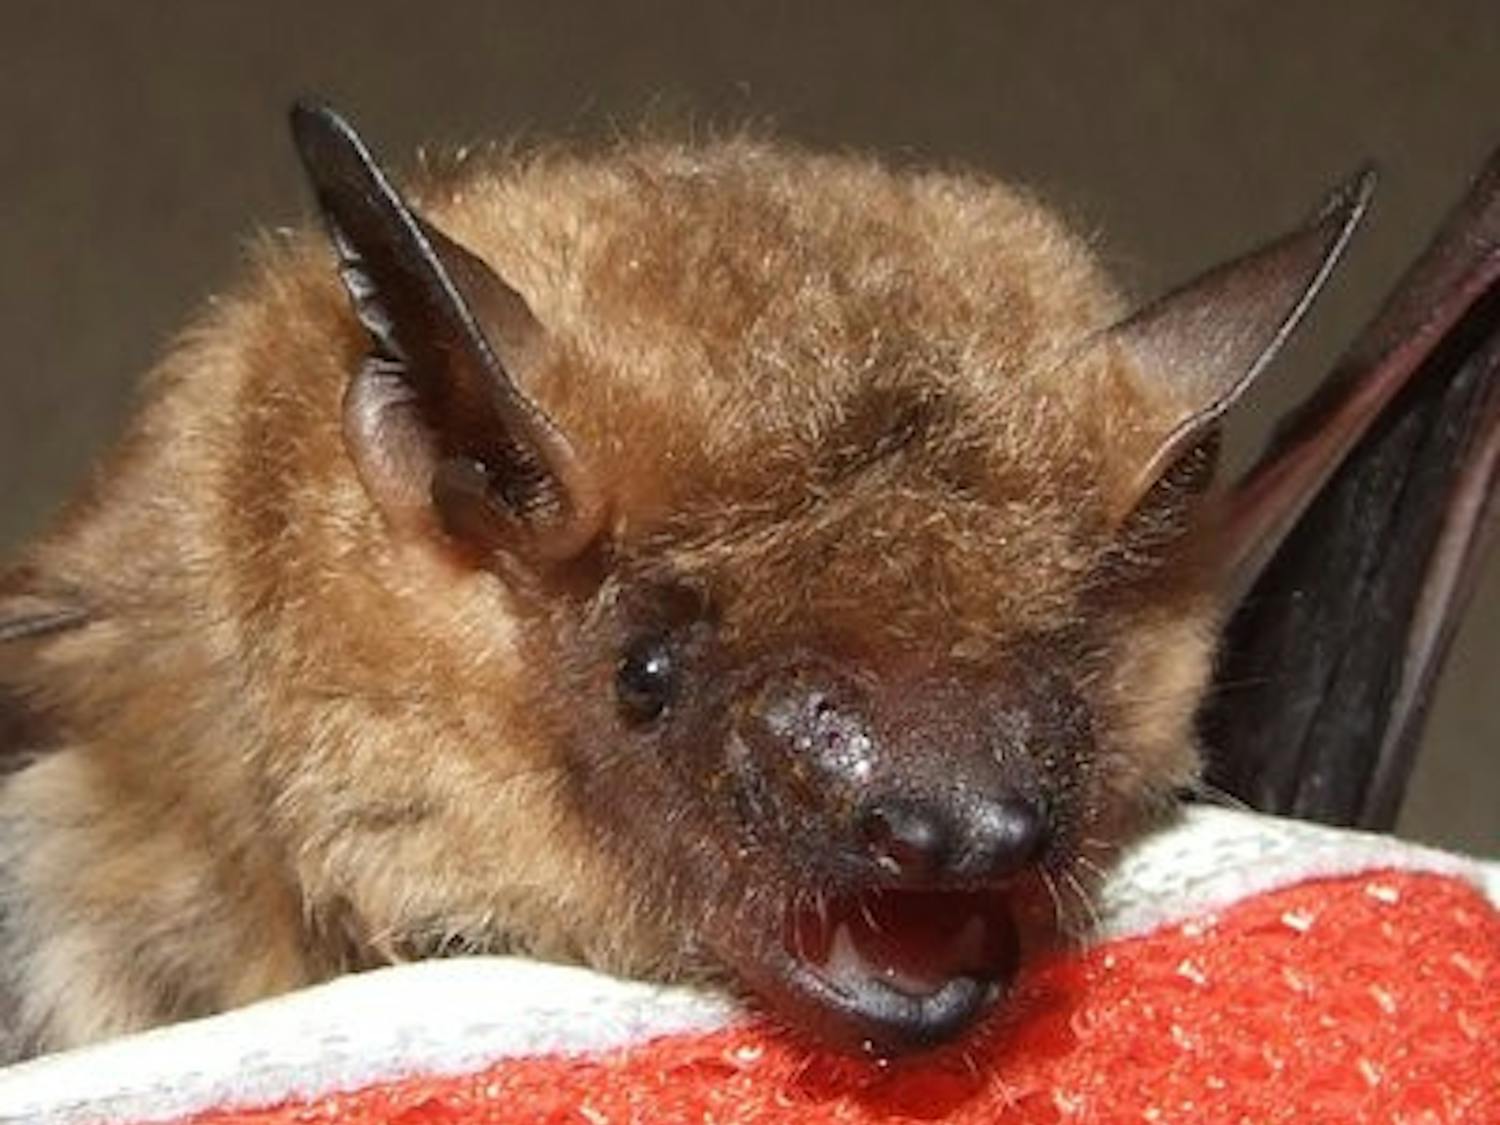 Native to Alabama, the evening bat named Nita Nightwing will be at the event.